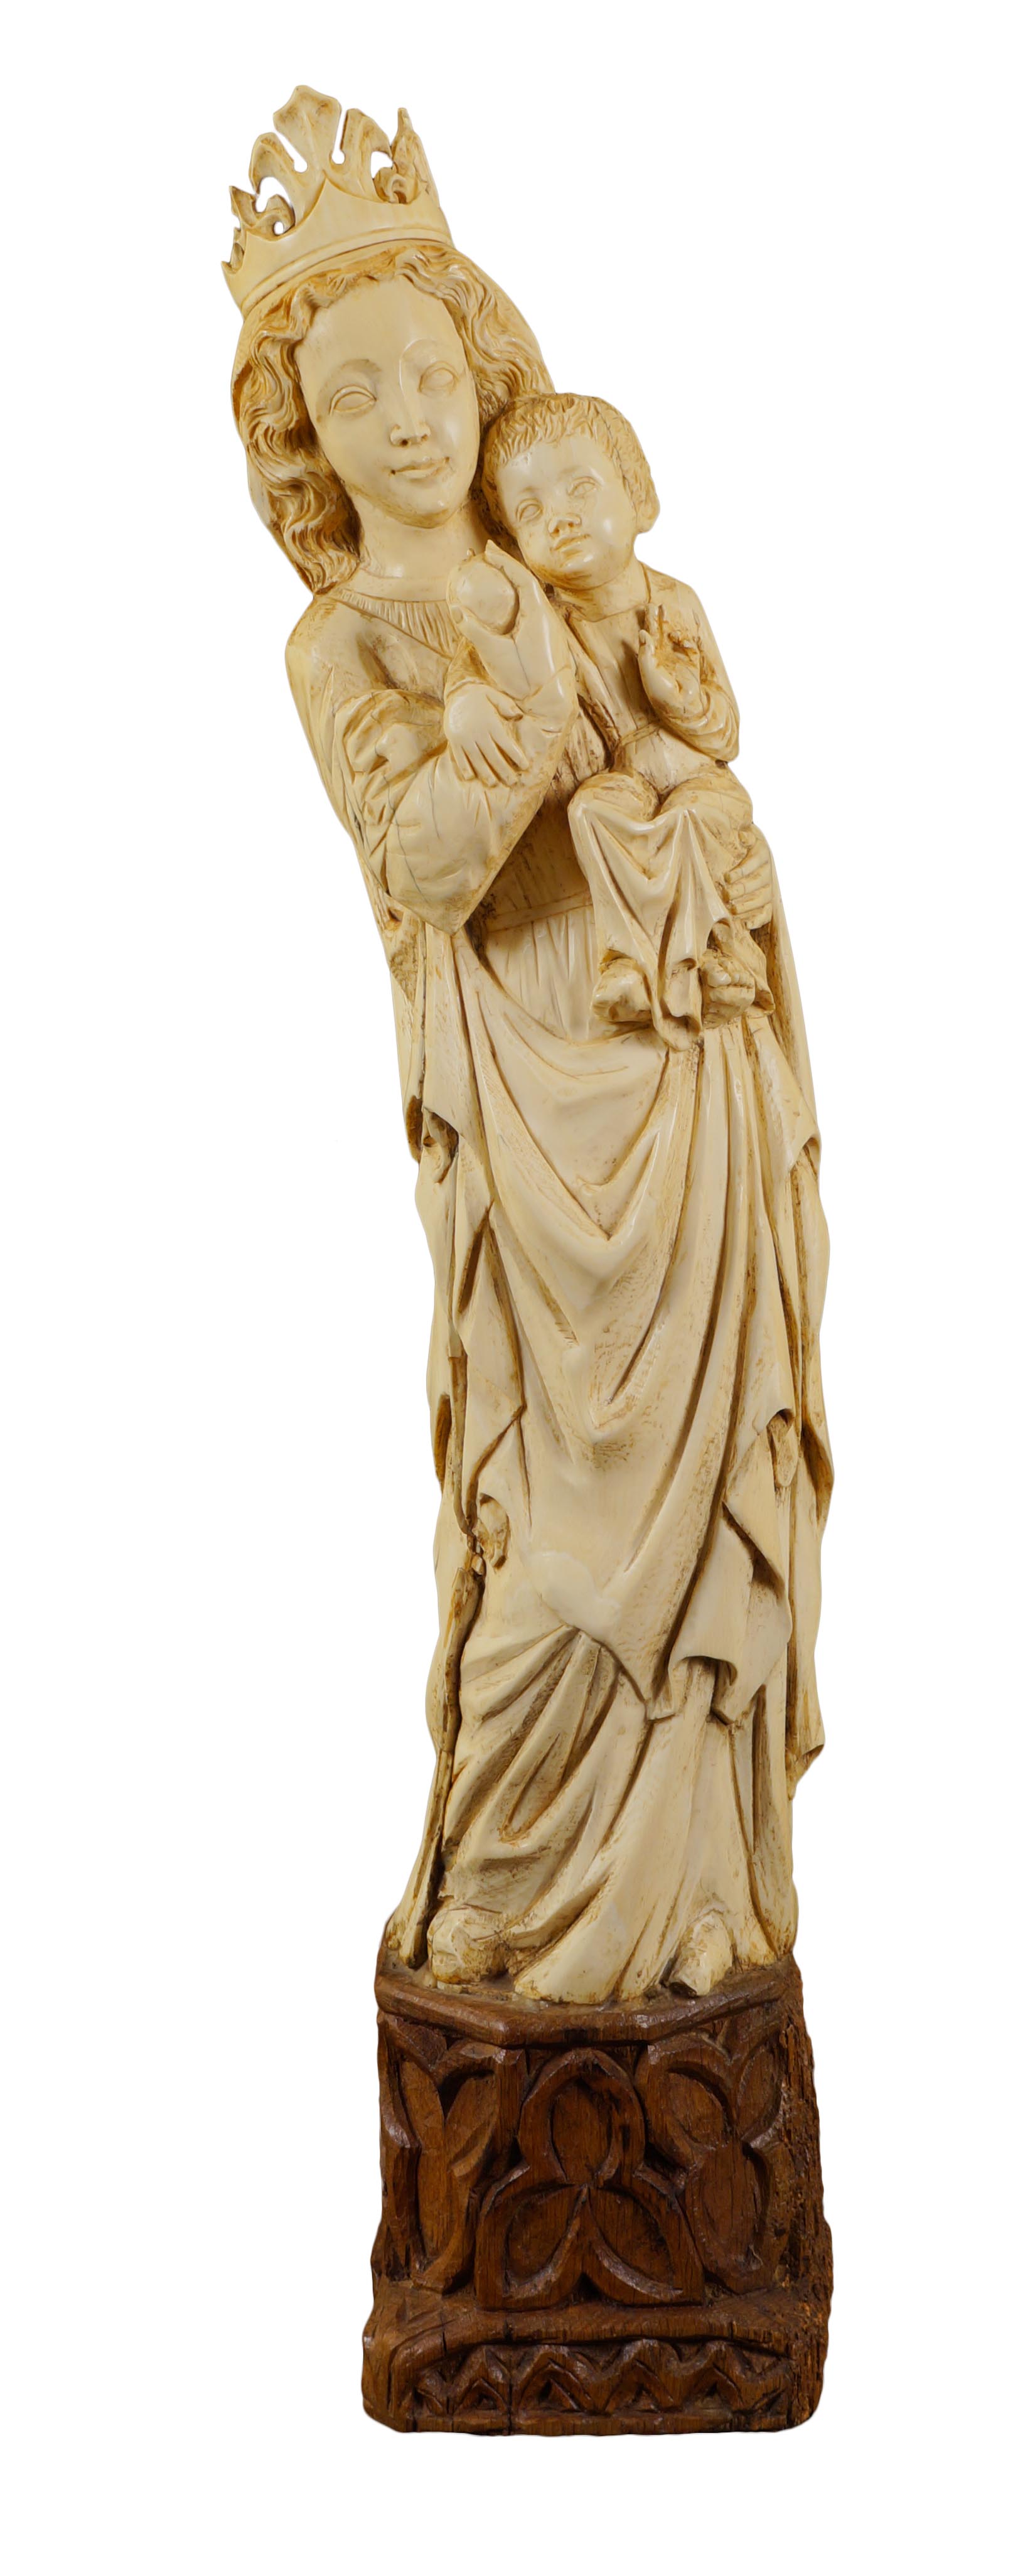 An important French Gothic ivory sculpture the extraordinary statue of the Virgin Mary with Child